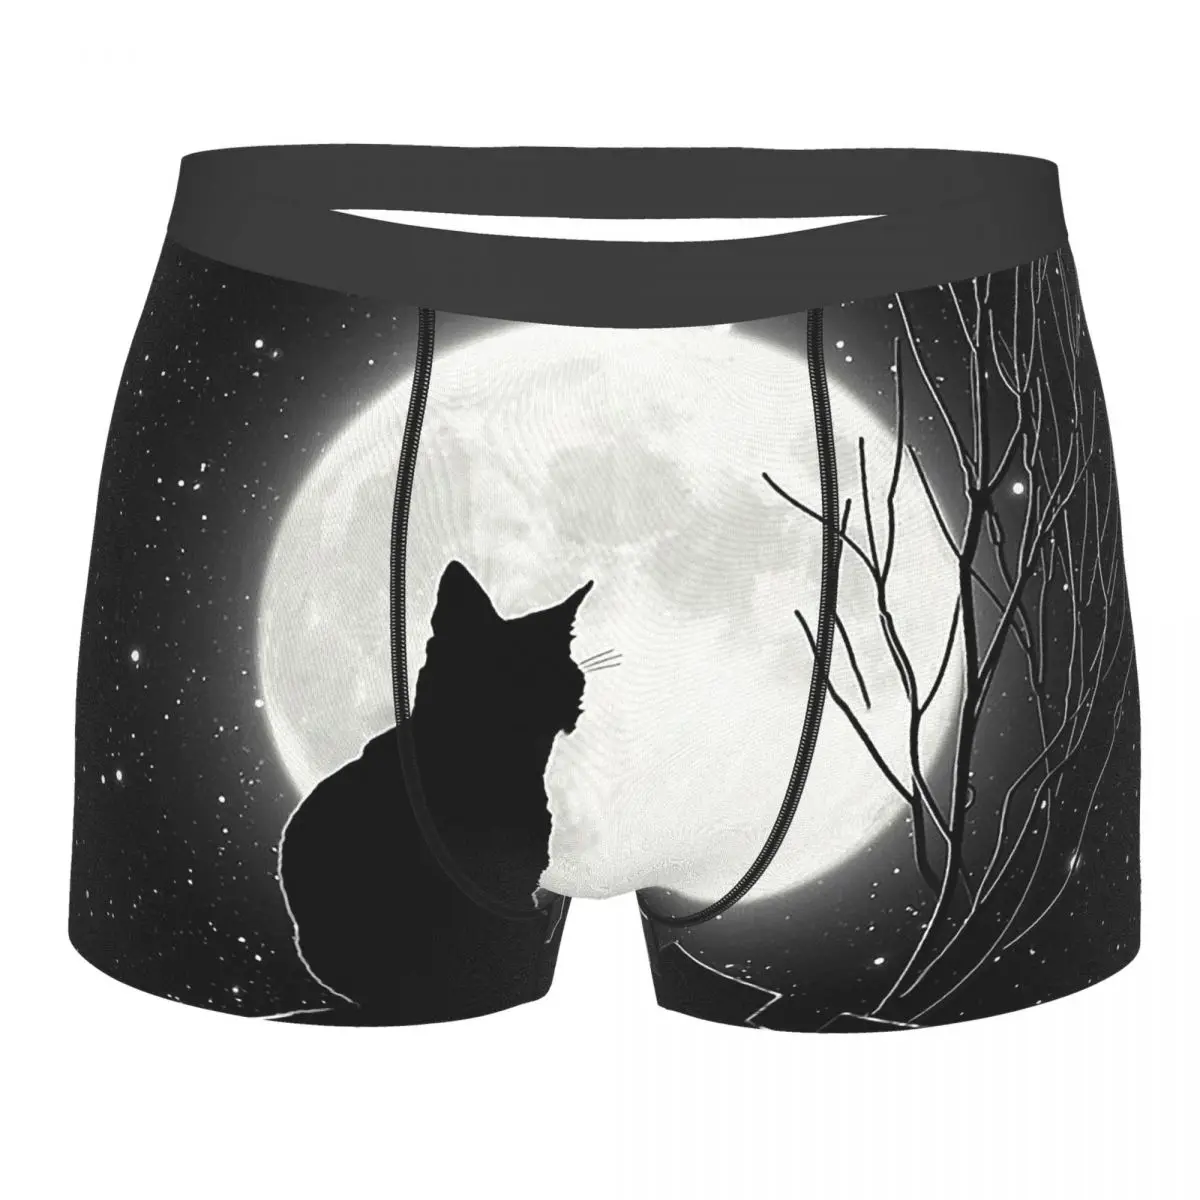 

Starry Sky Silent Night Cat Looking At The Full Moon Underpants Cotton Panties Male Underwear Comfortable Shorts Boxer Briefs